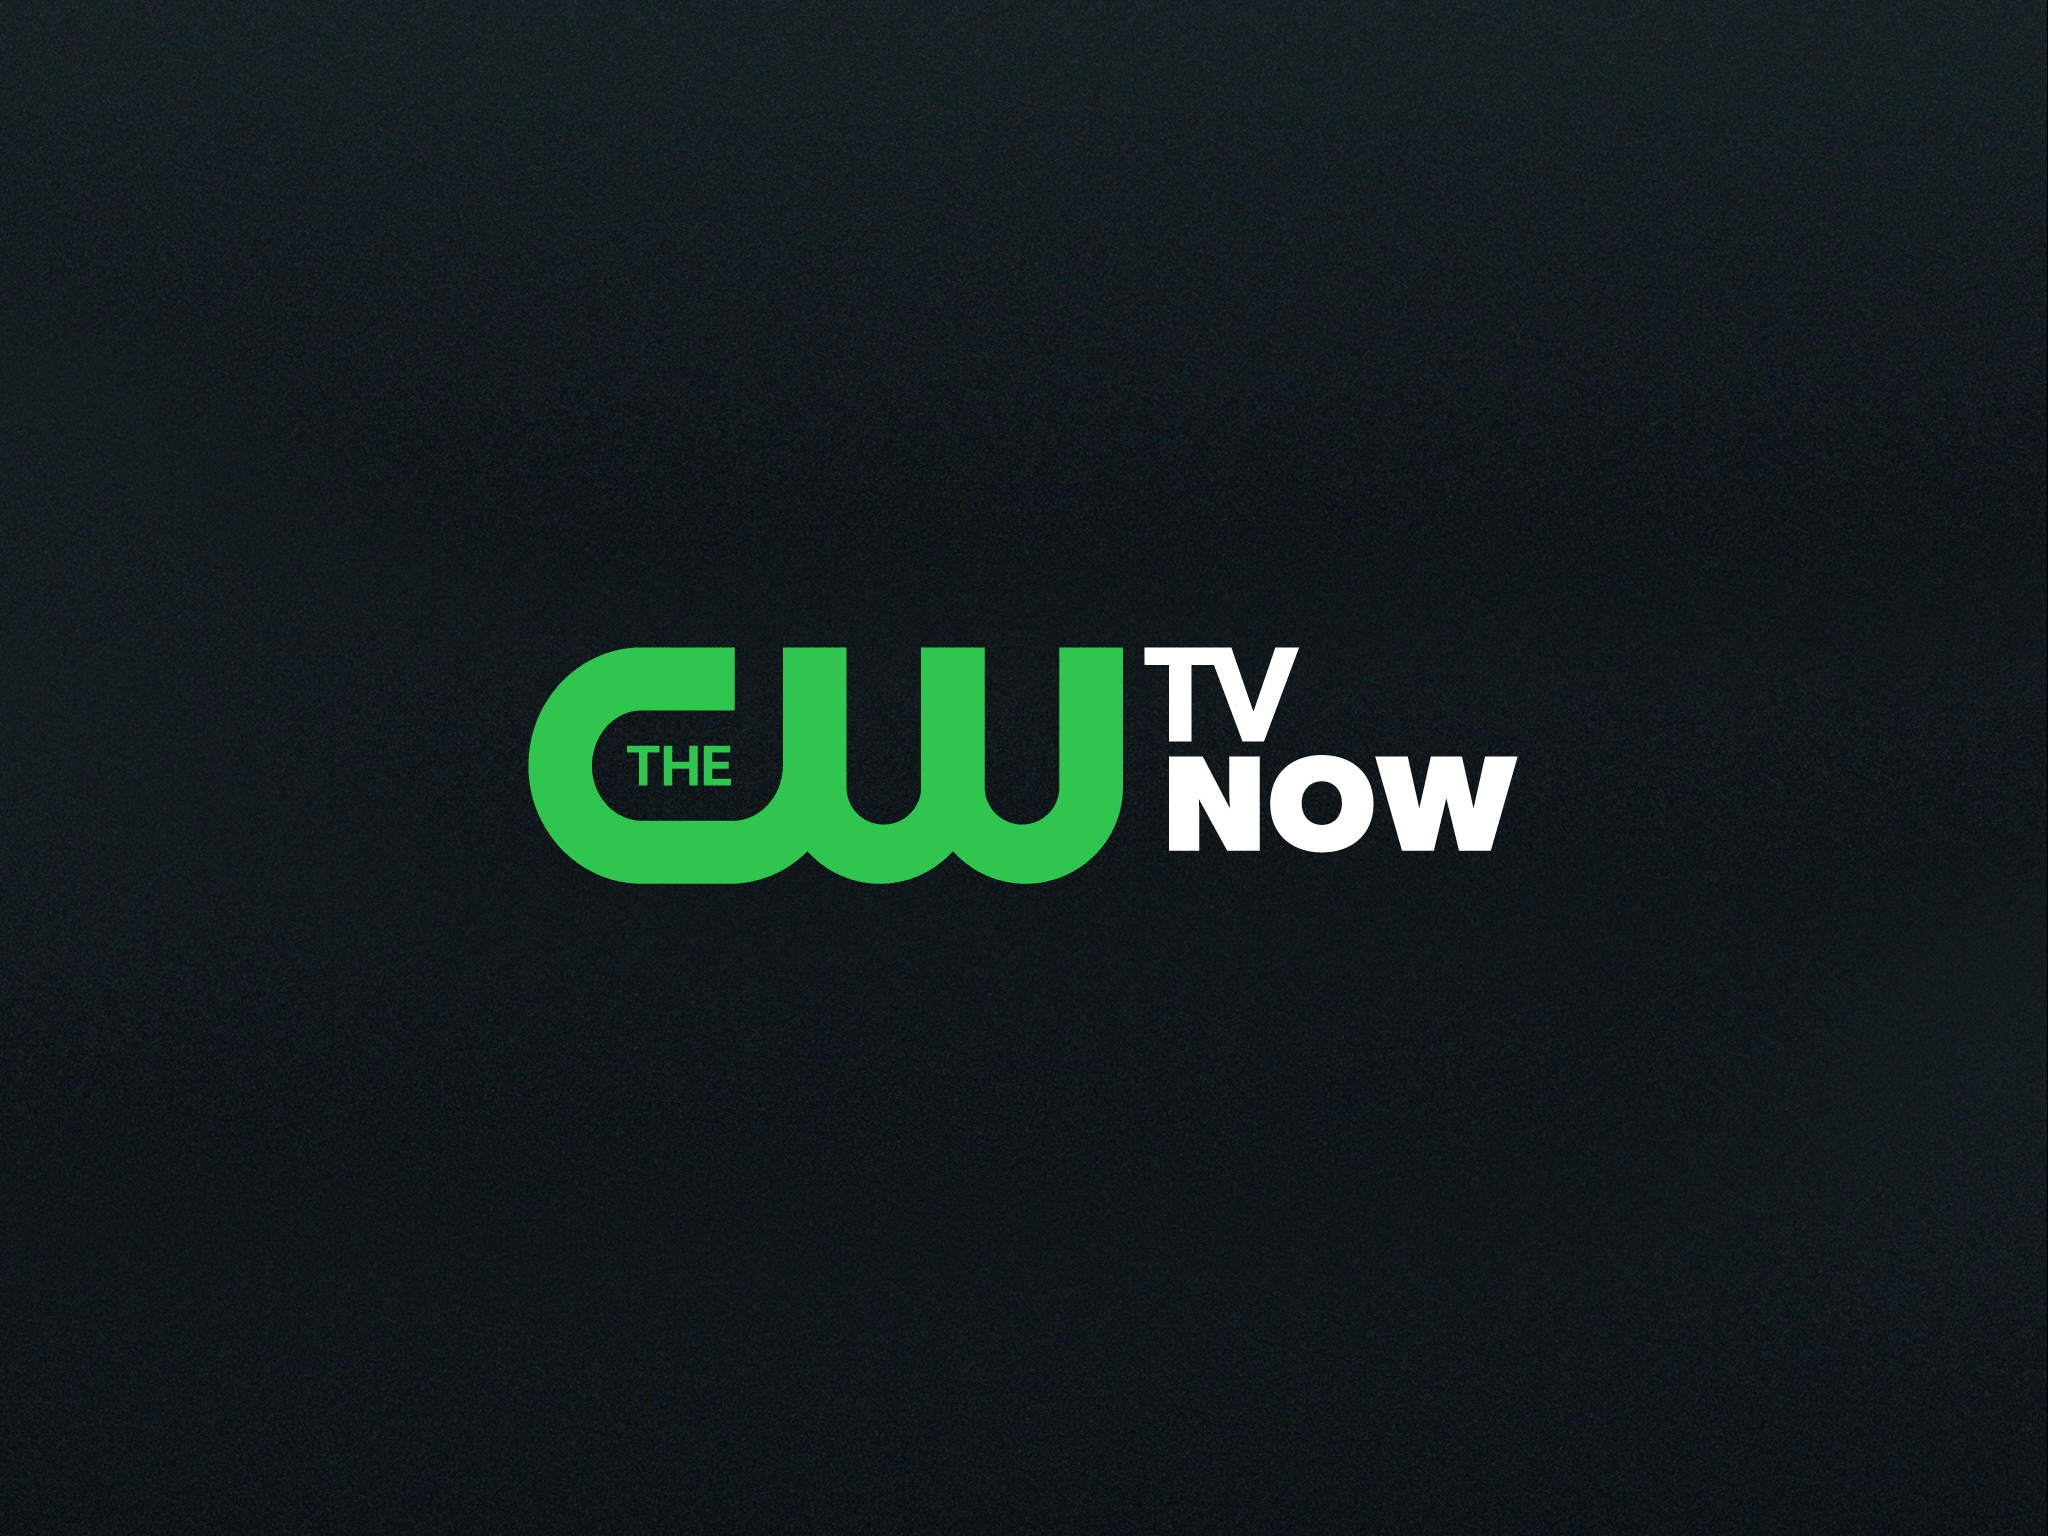 CW Returns to Cablevision Subscribers